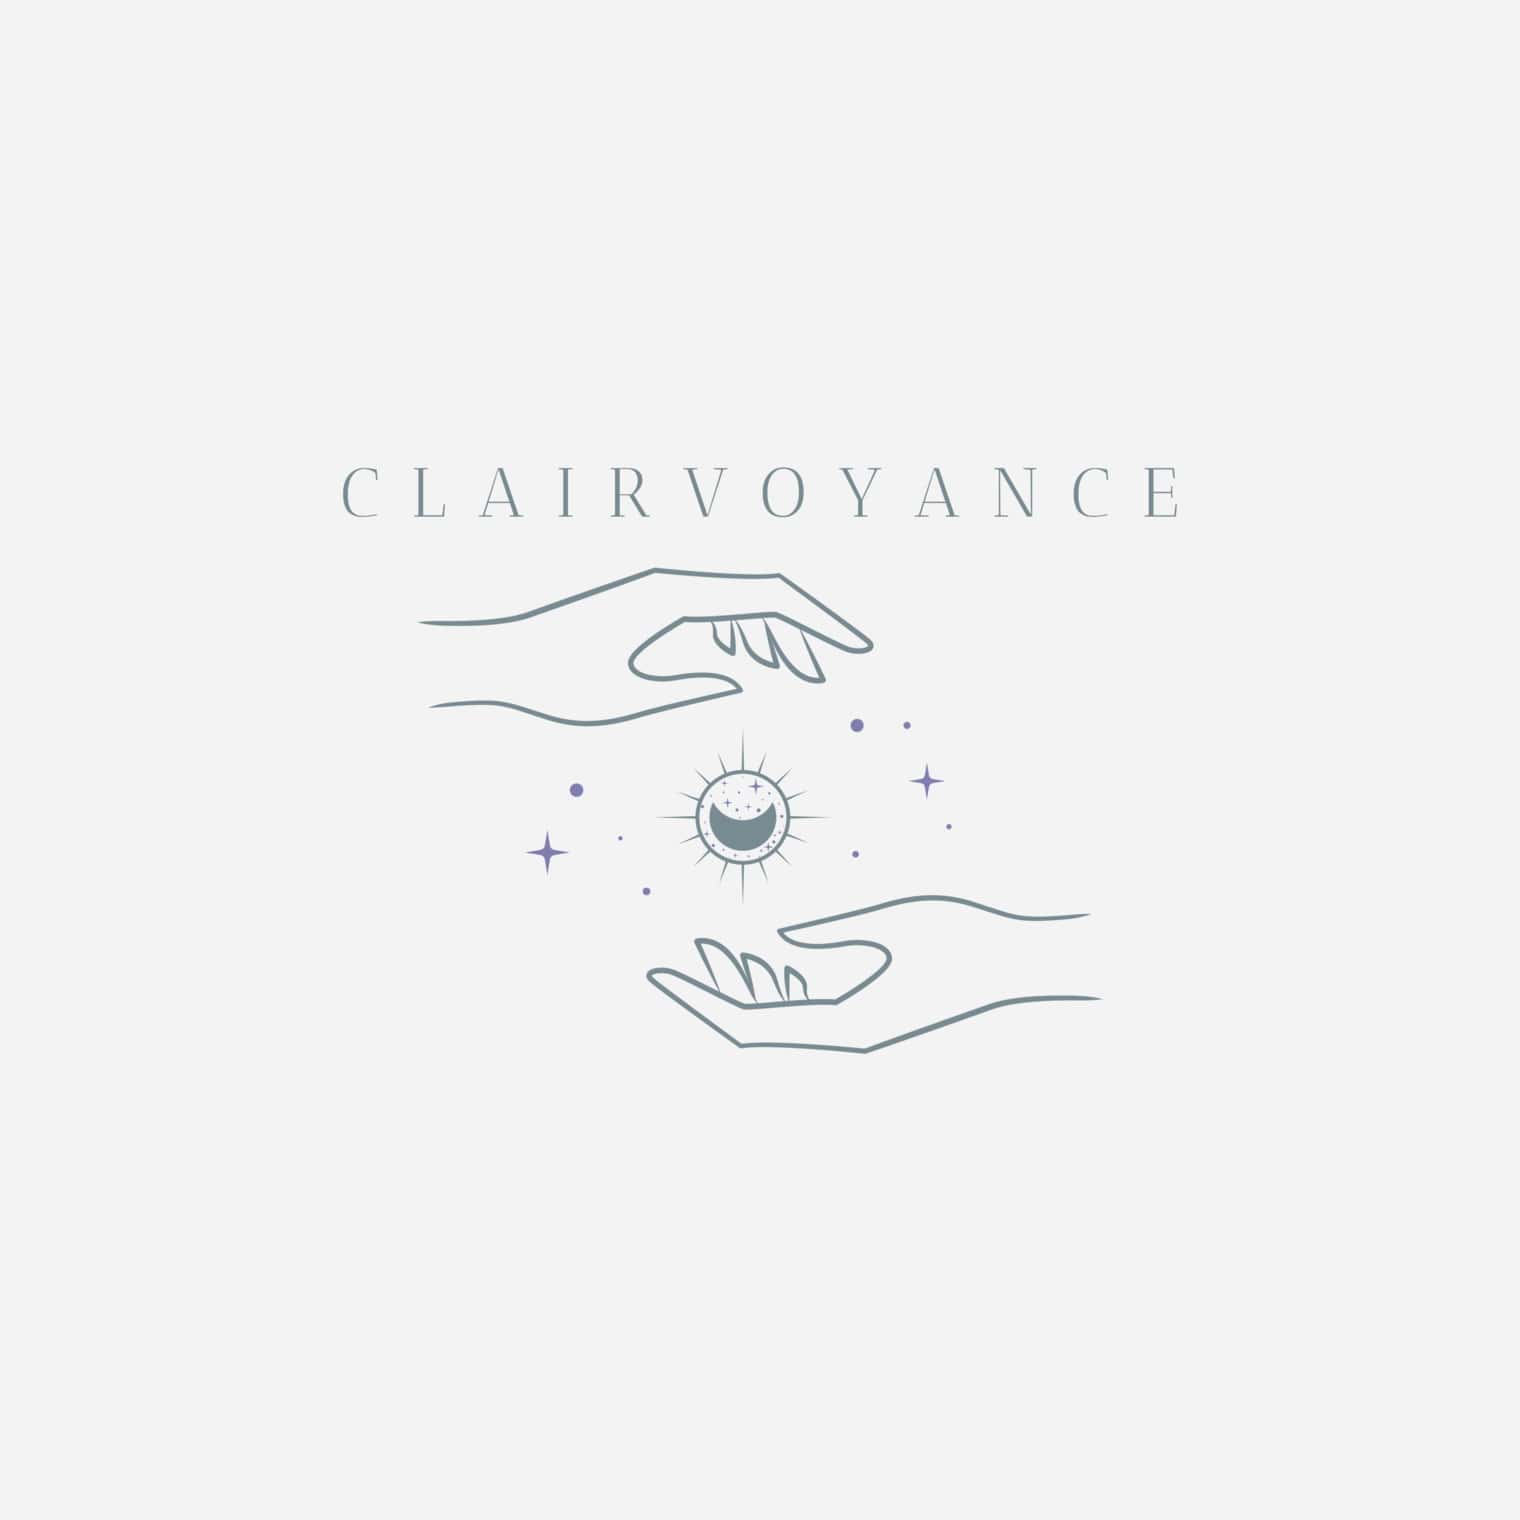 Service clairvoyance session by a clairvoyant in Brussels in Belgium online by phone for free